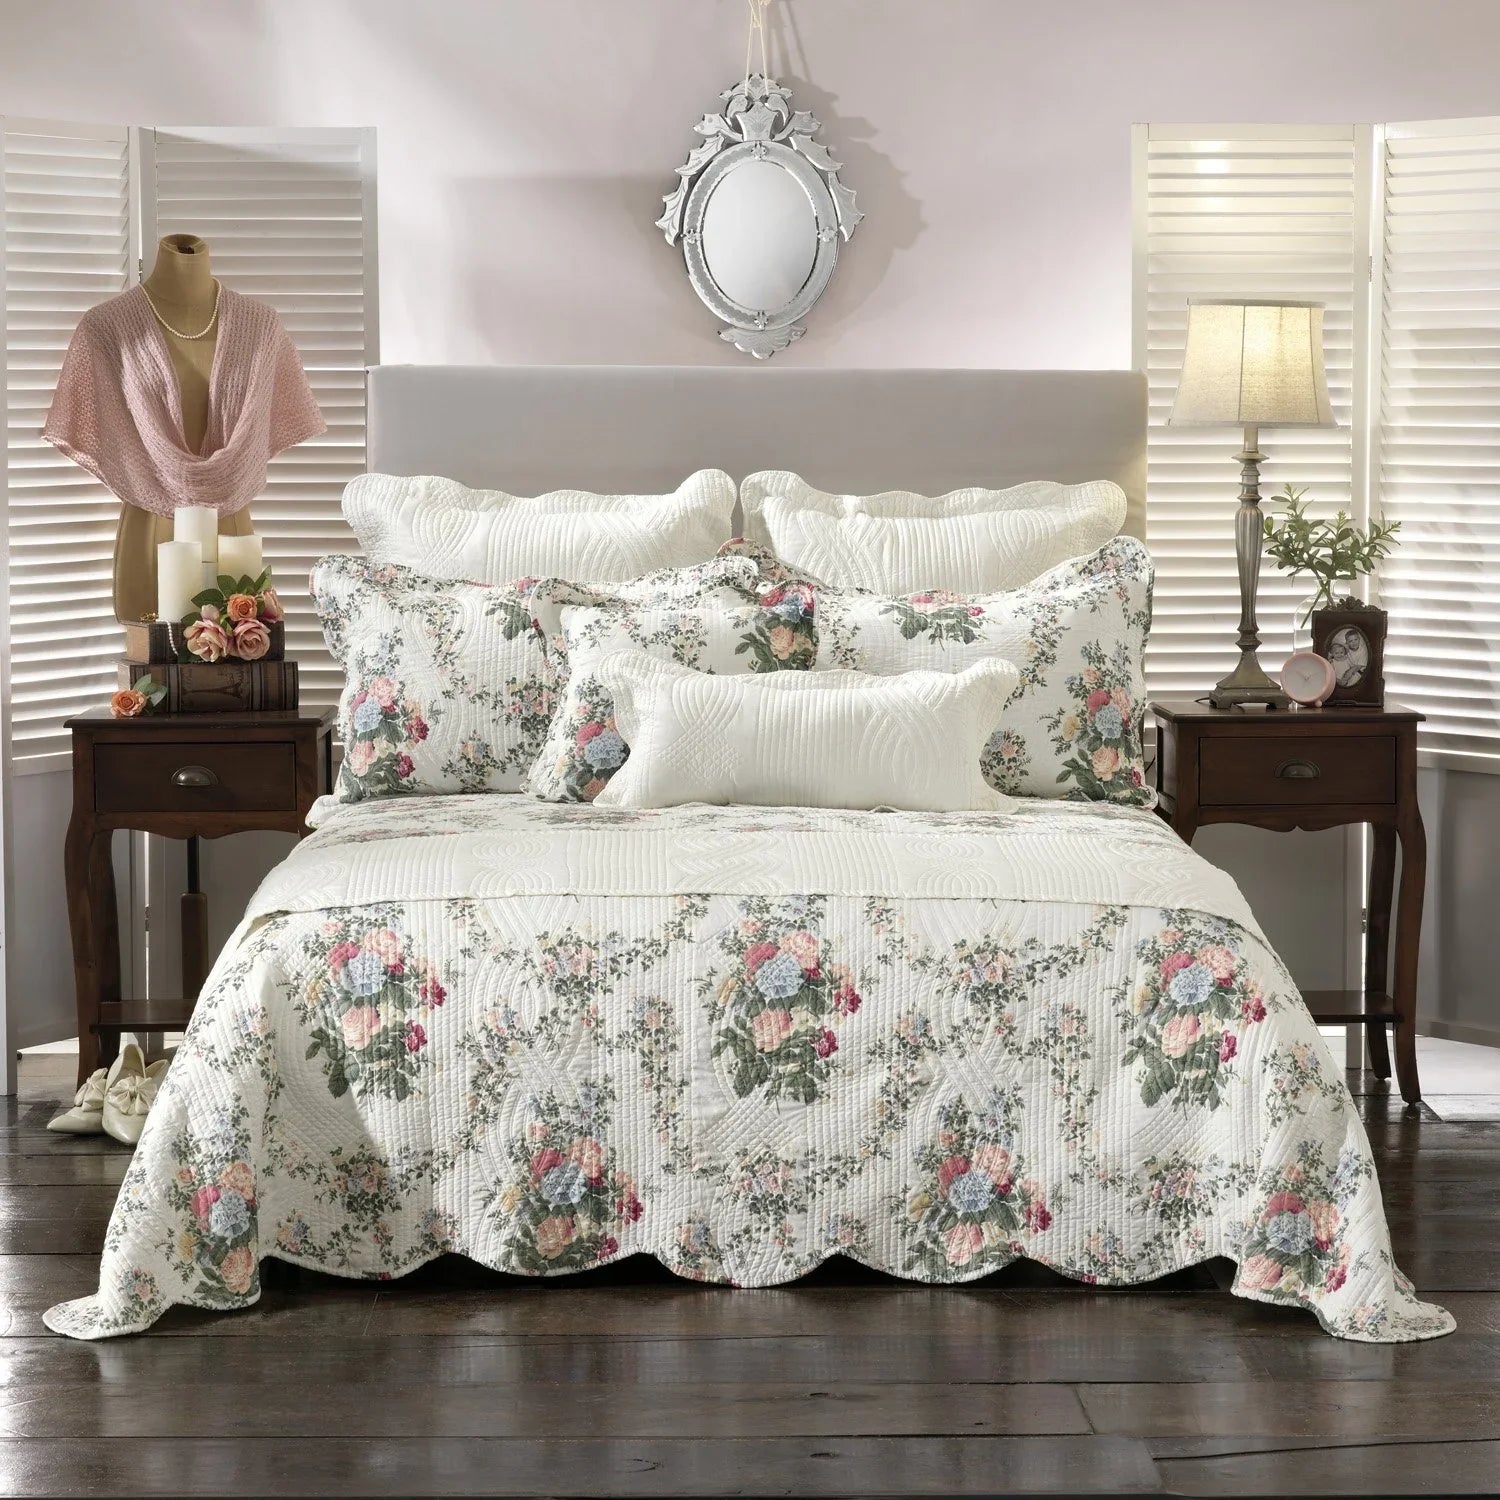 Discover exquisite and fashionable Bianca bedding options available at Linen Emporium. Explore our extensive collection of premium Bianca bedspreads, pillowcases, quilt covers, and much more.